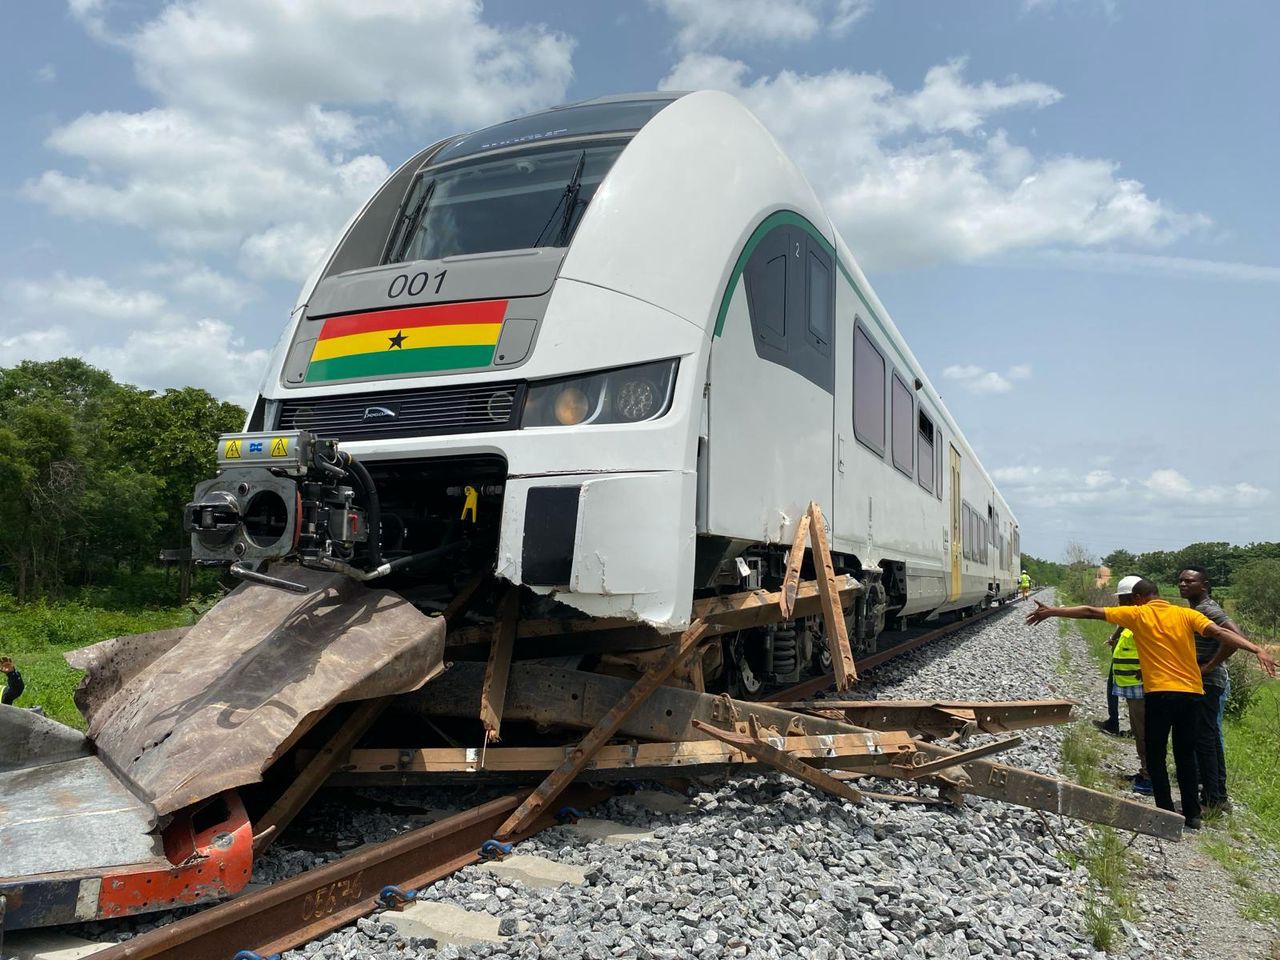 The Pesa DMU involved in an accident in Ghana